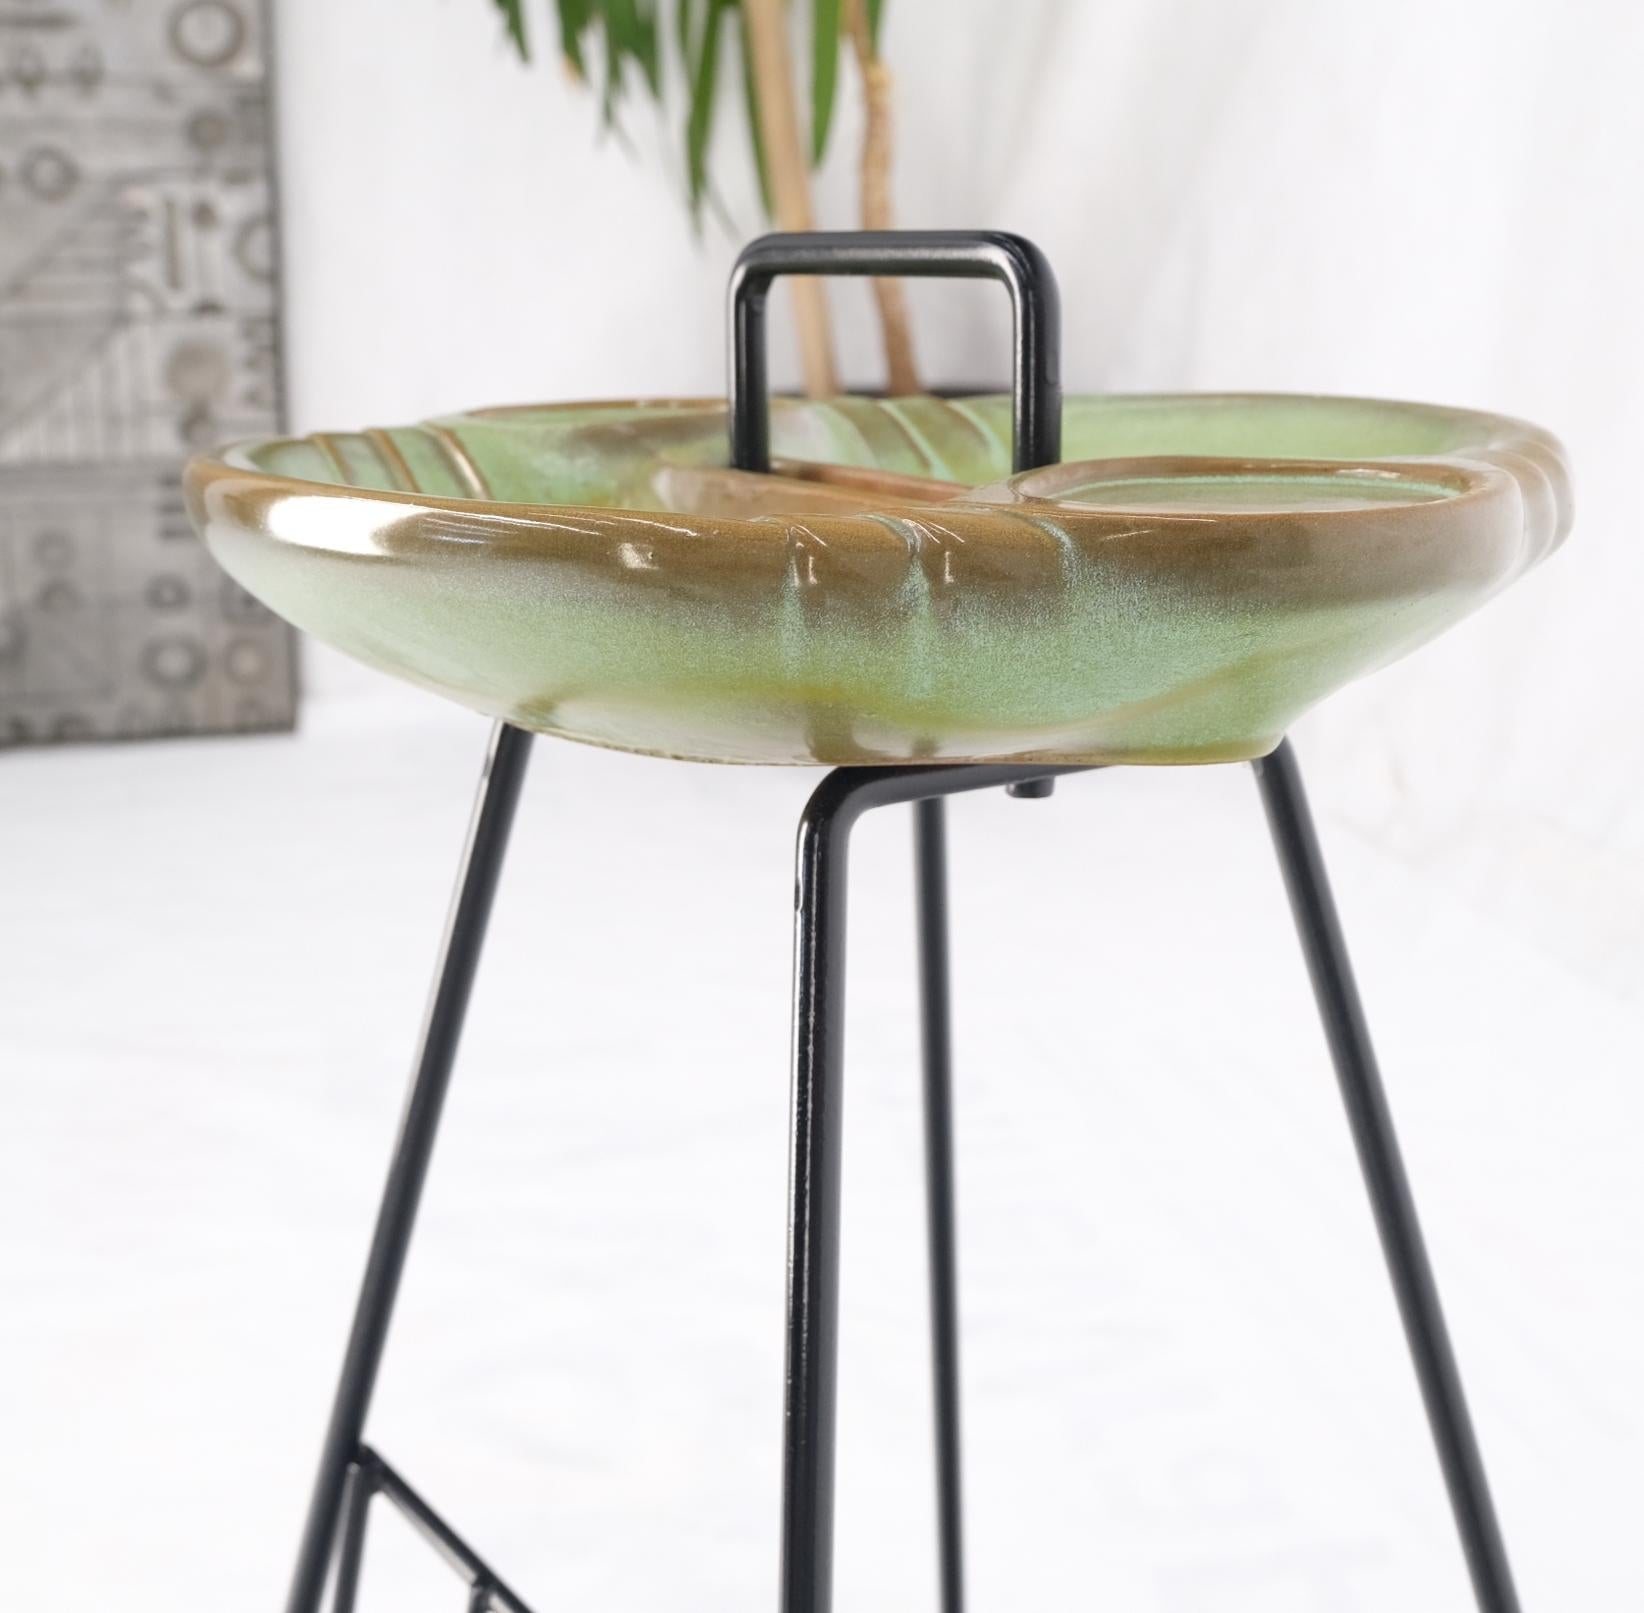 20th Century Mid-Century Modern Ceramic Ashtray on Wire Legs Magazine Rack Stand For Sale